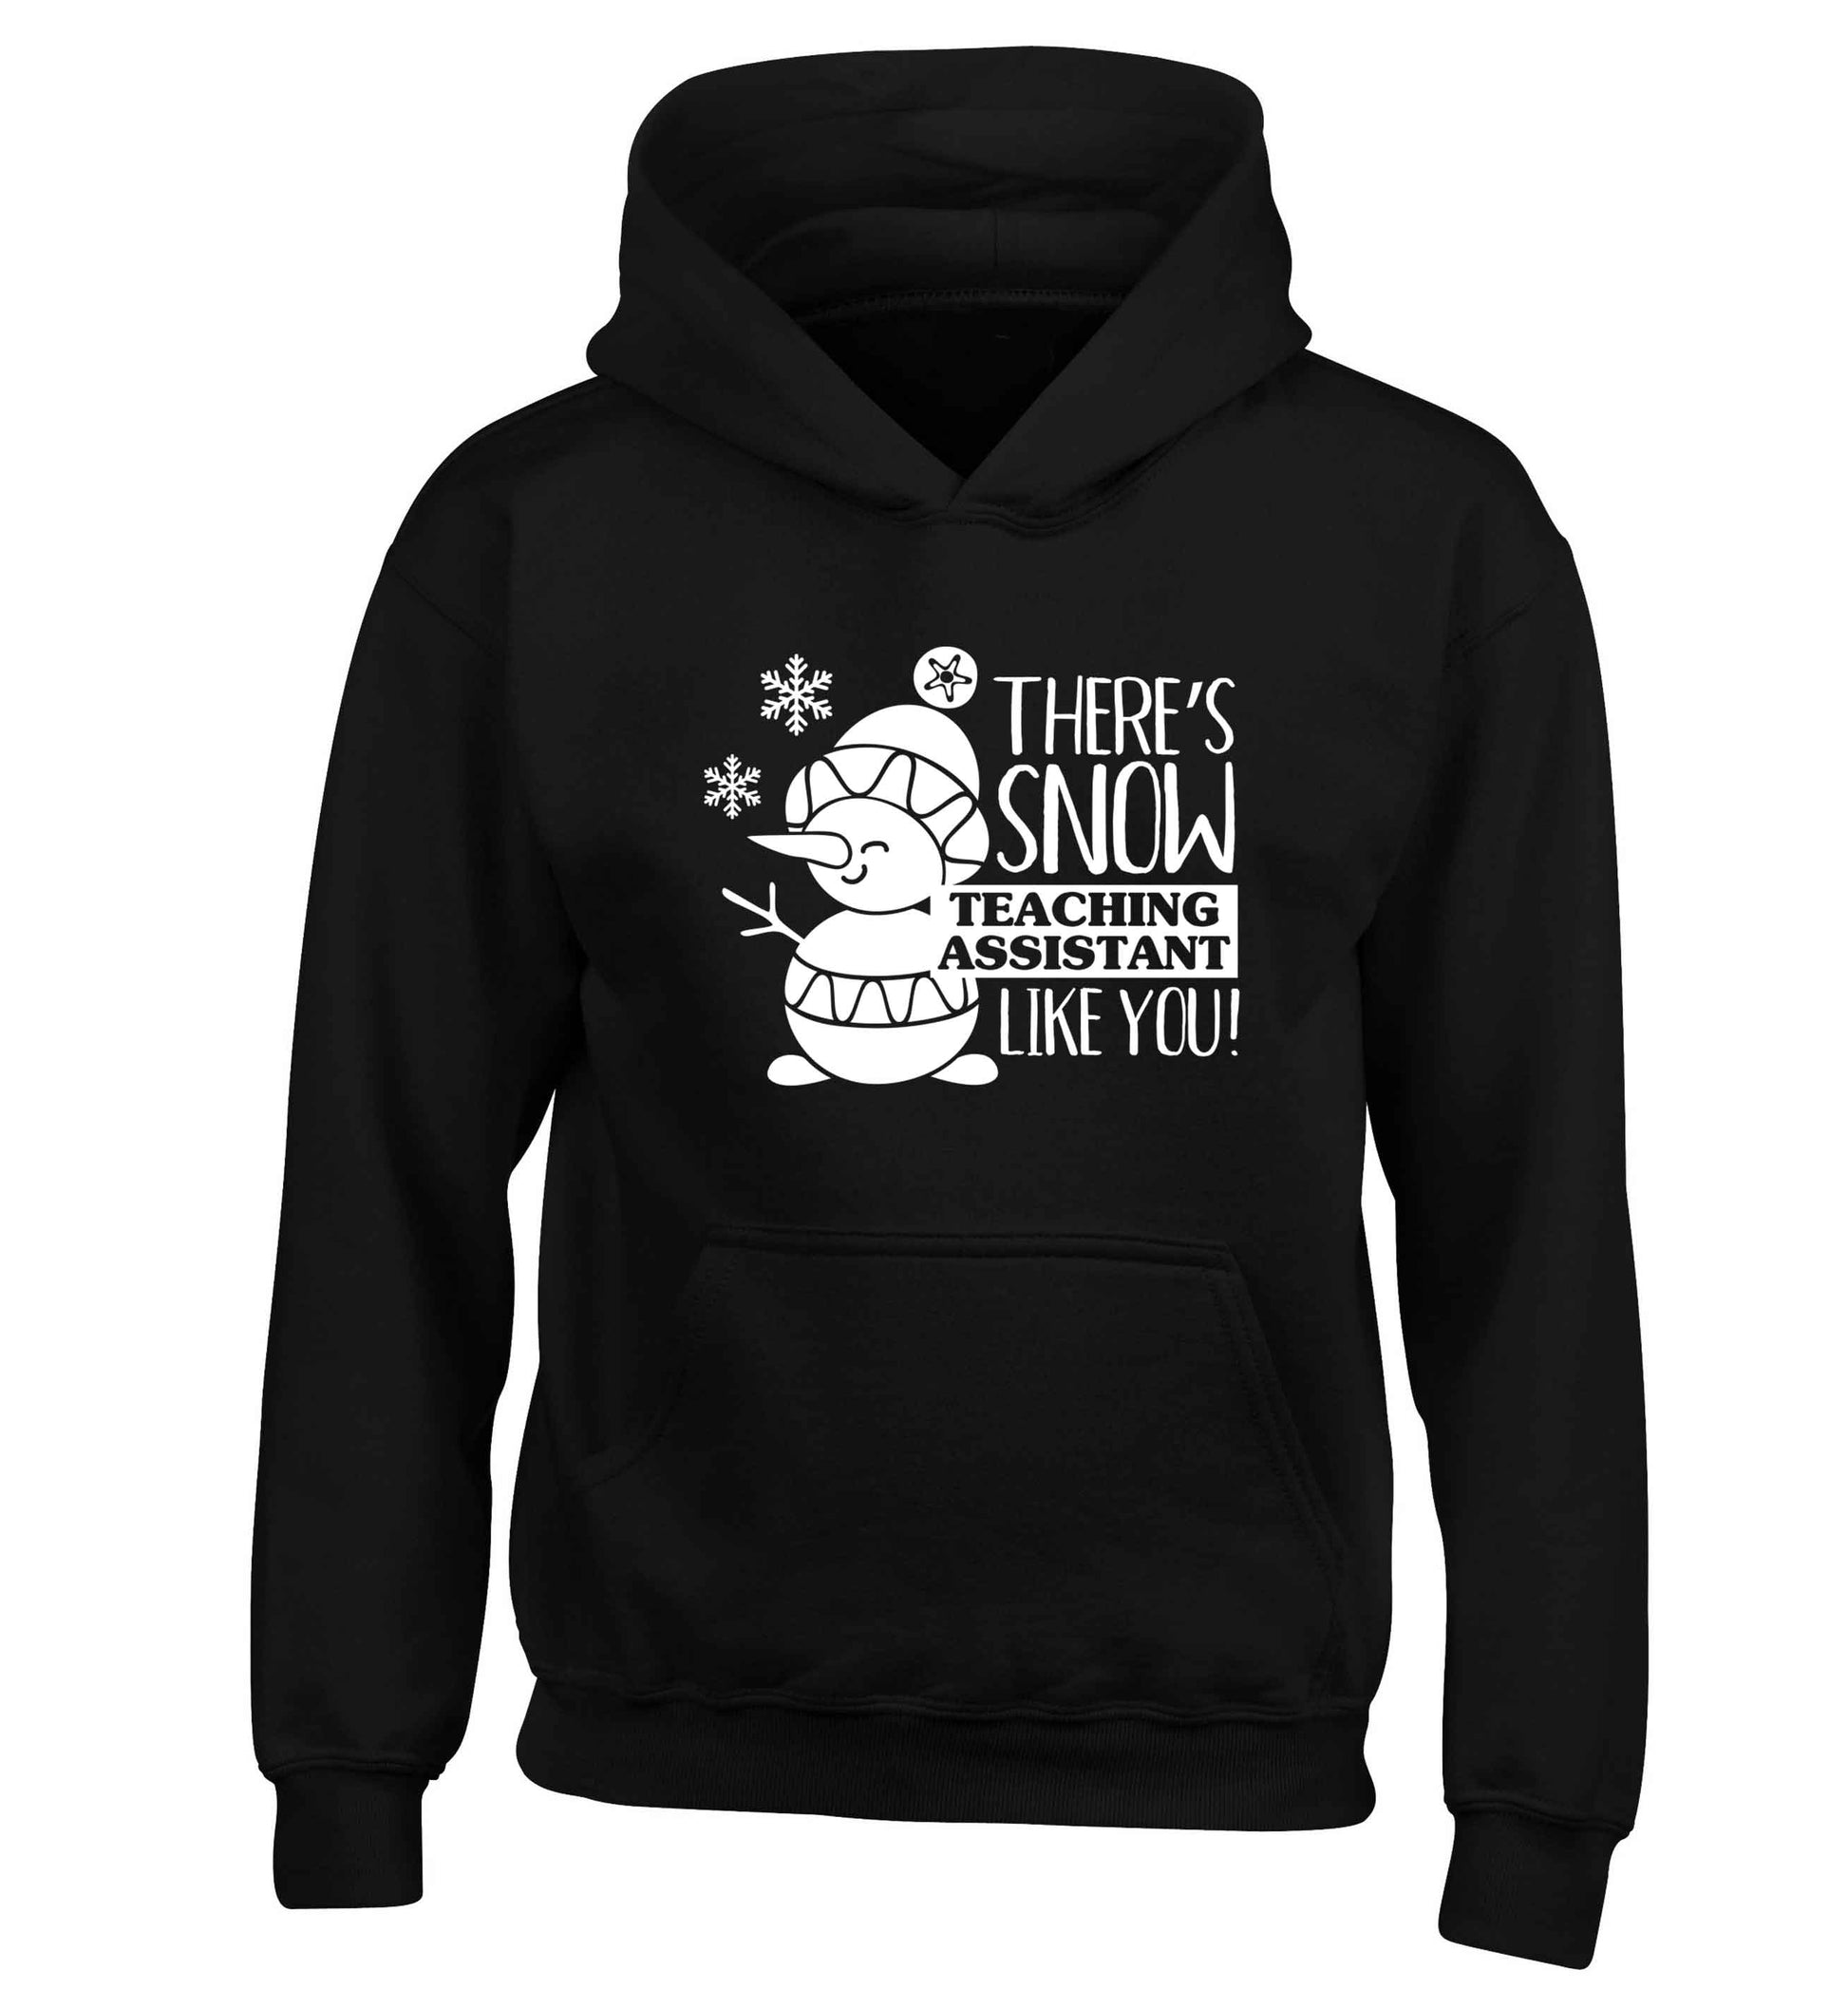 There's snow teaching assistant like you children's black hoodie 12-13 Years